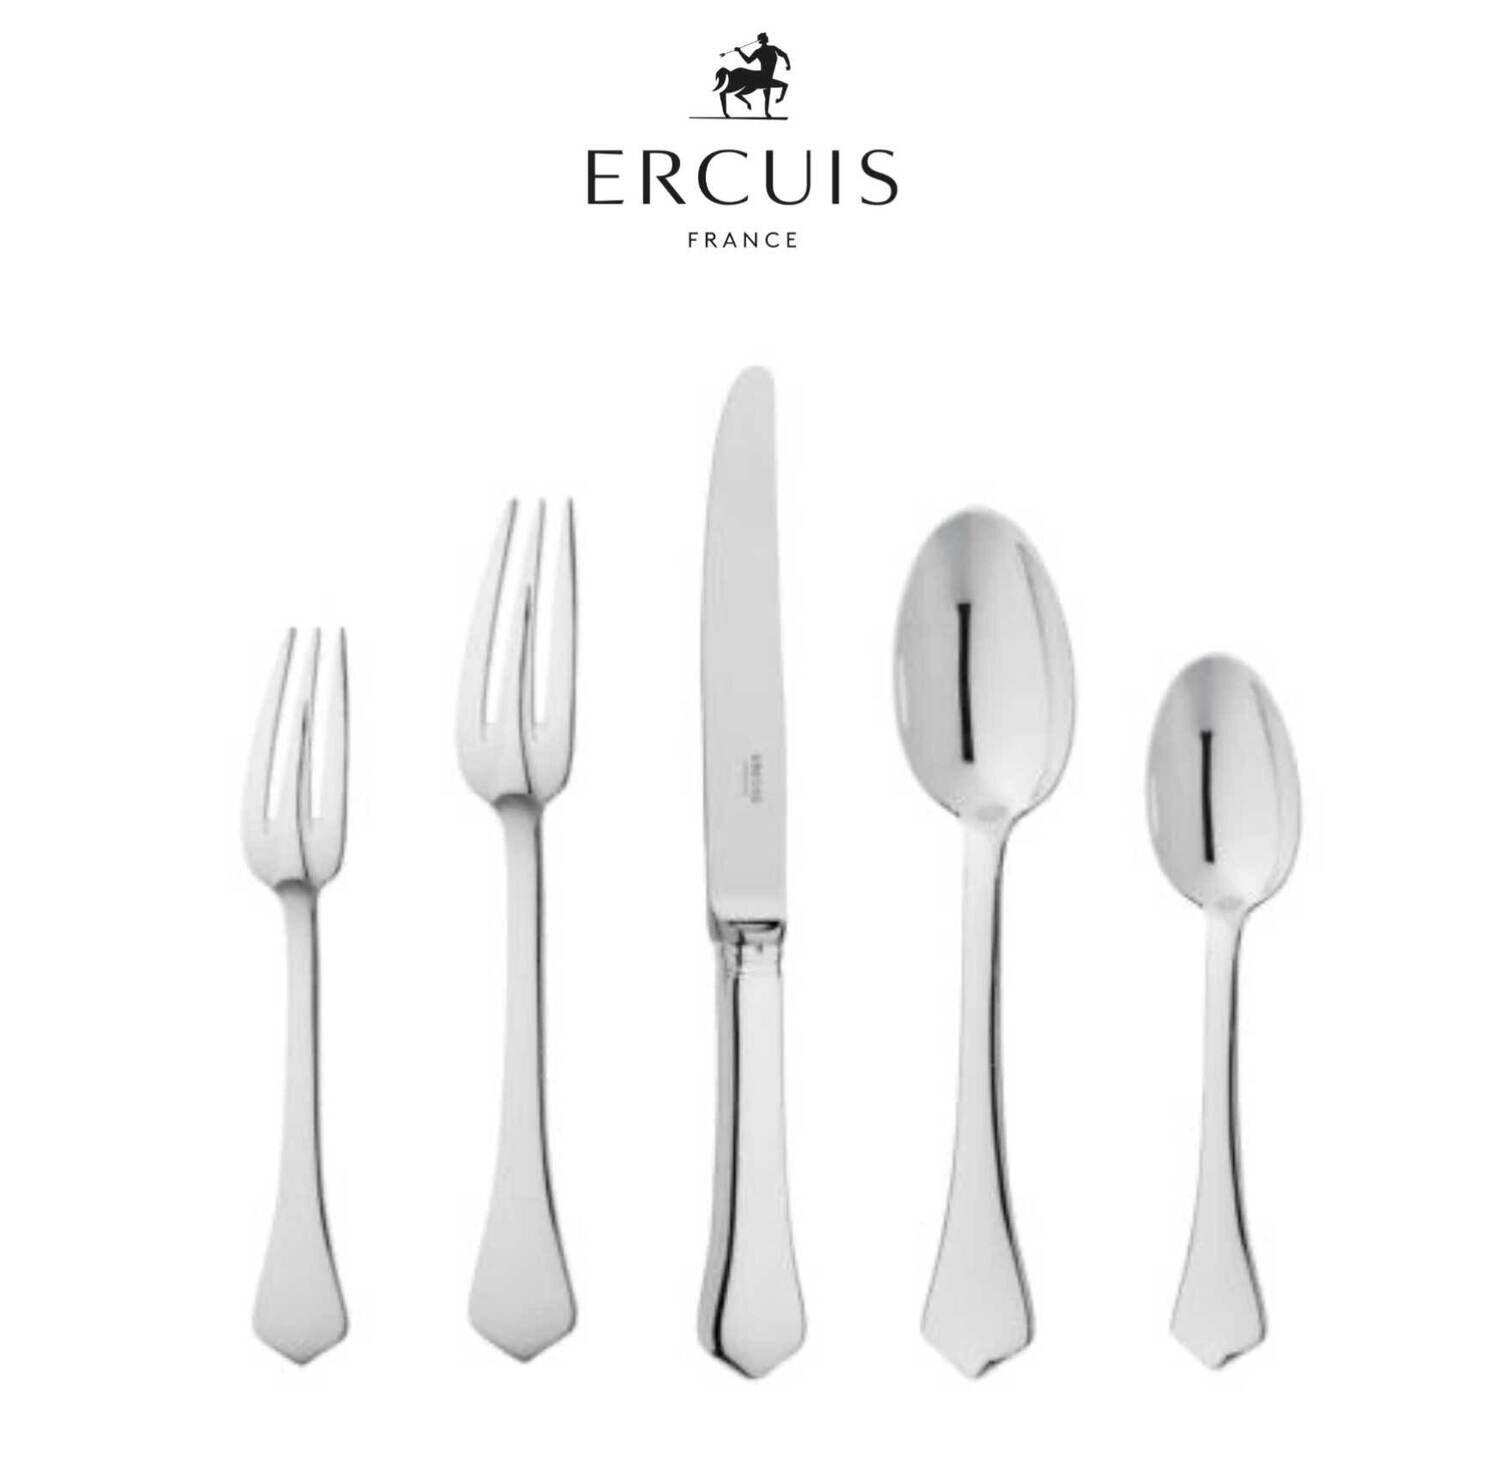 Ercuis Brantome Dinner Spoon 8 Inch Stainless Steel Silver plated F665150-01